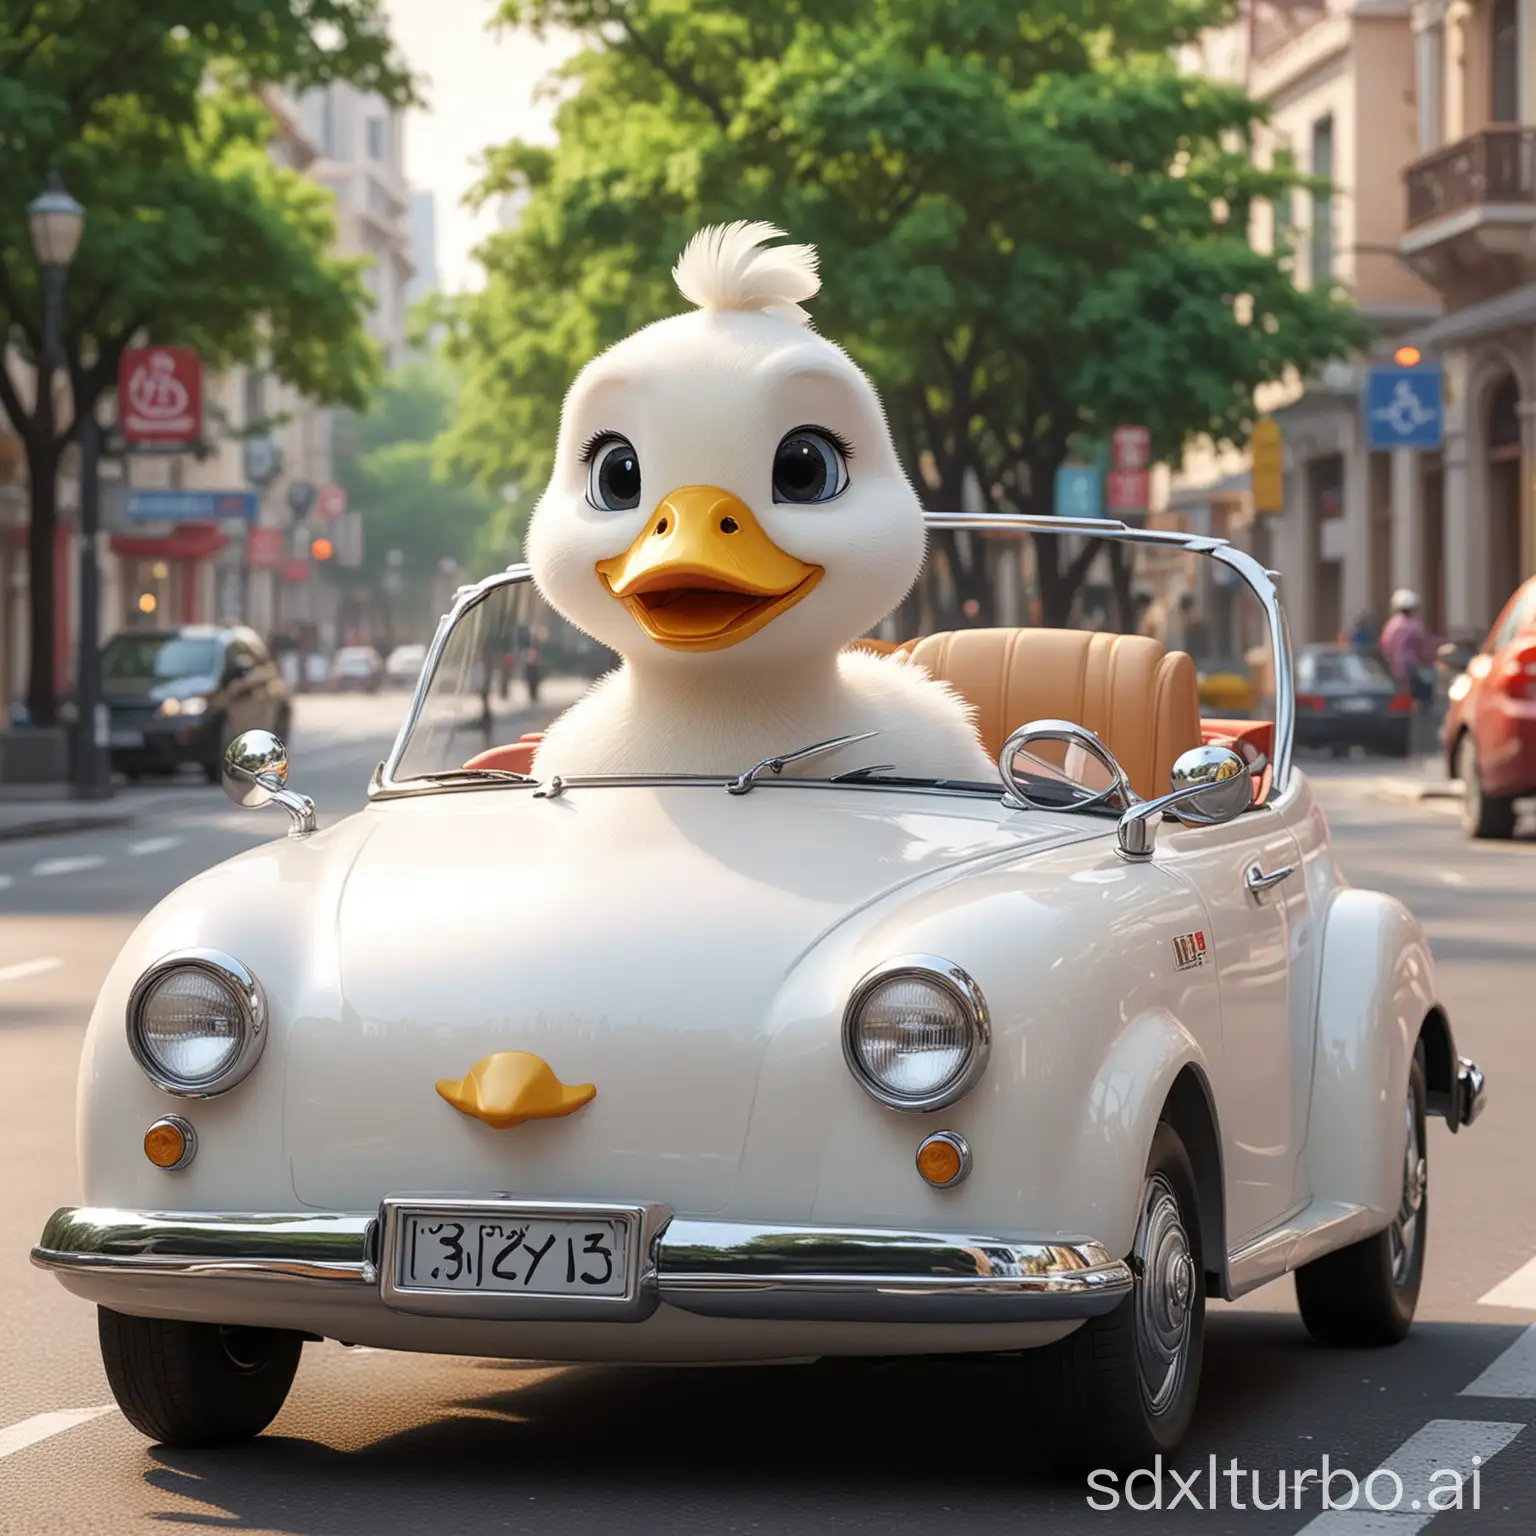 A white duck, cute, driving a Guangzhou car, no convertible, smiling, bright eyes, panoramic view, 3D Disney style, high quality rendering